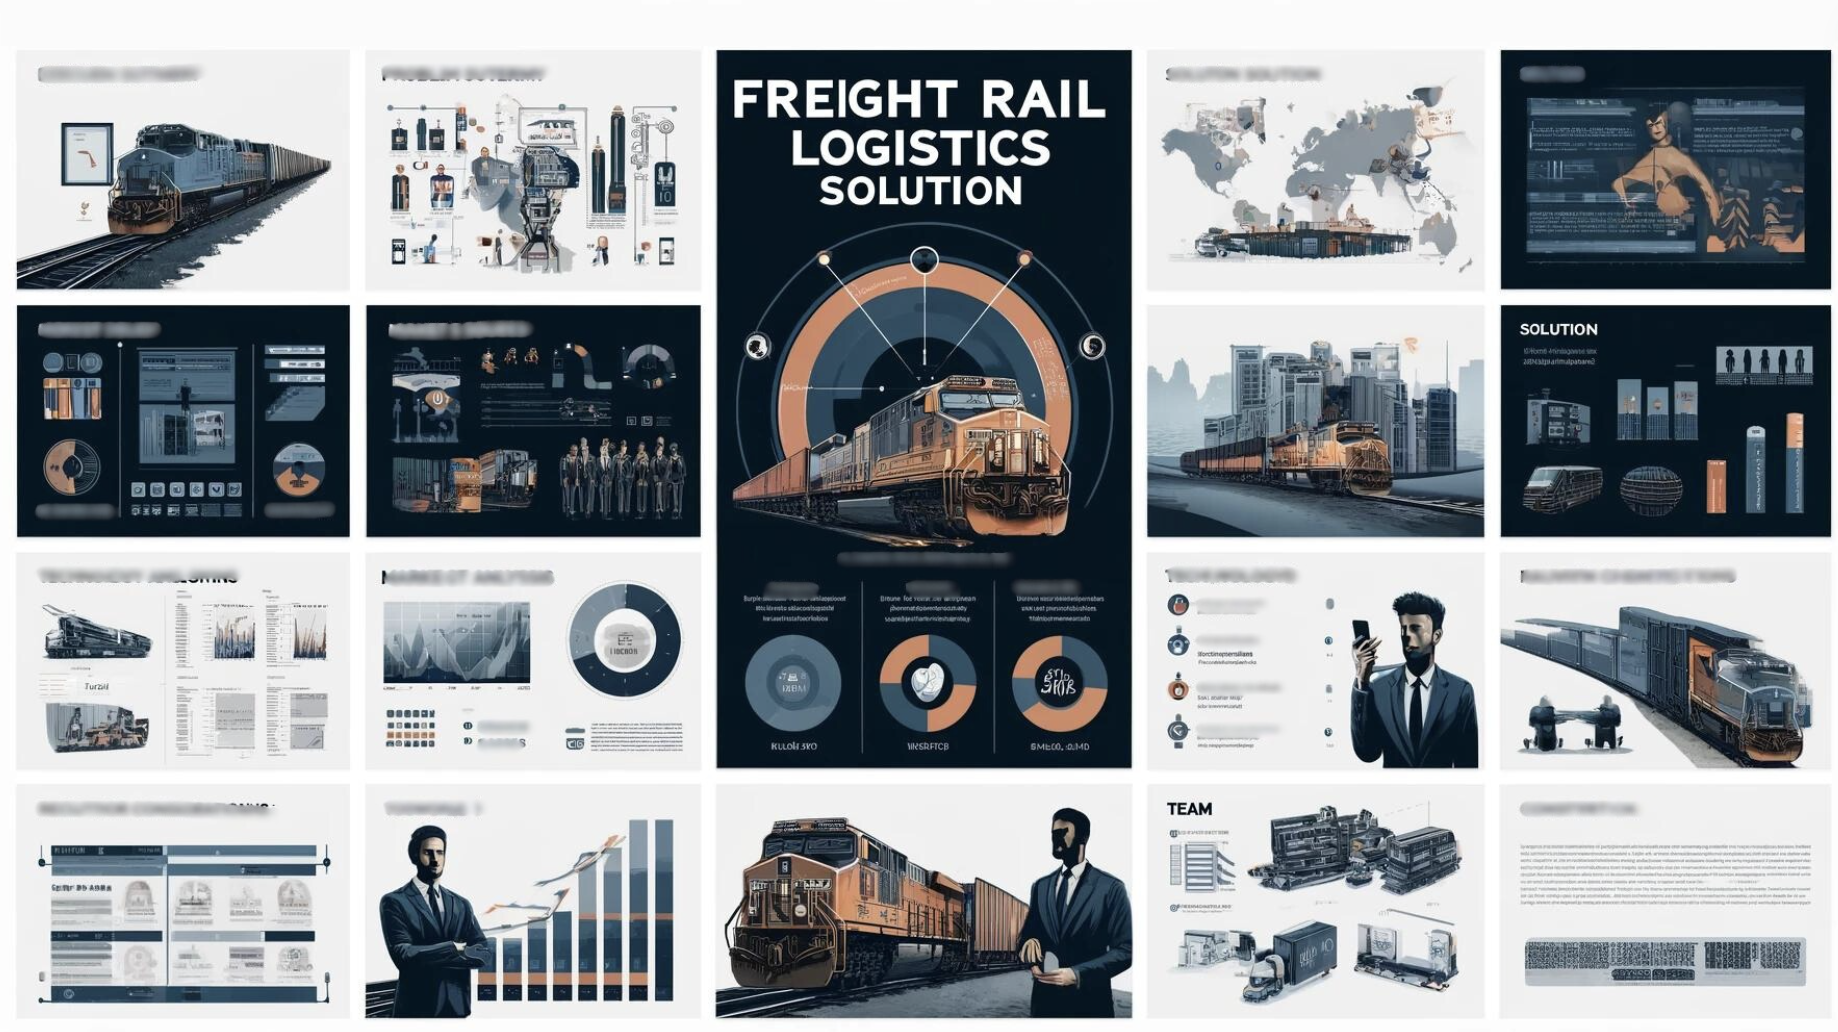 Freight Rail Logistics Solution pitch deck example